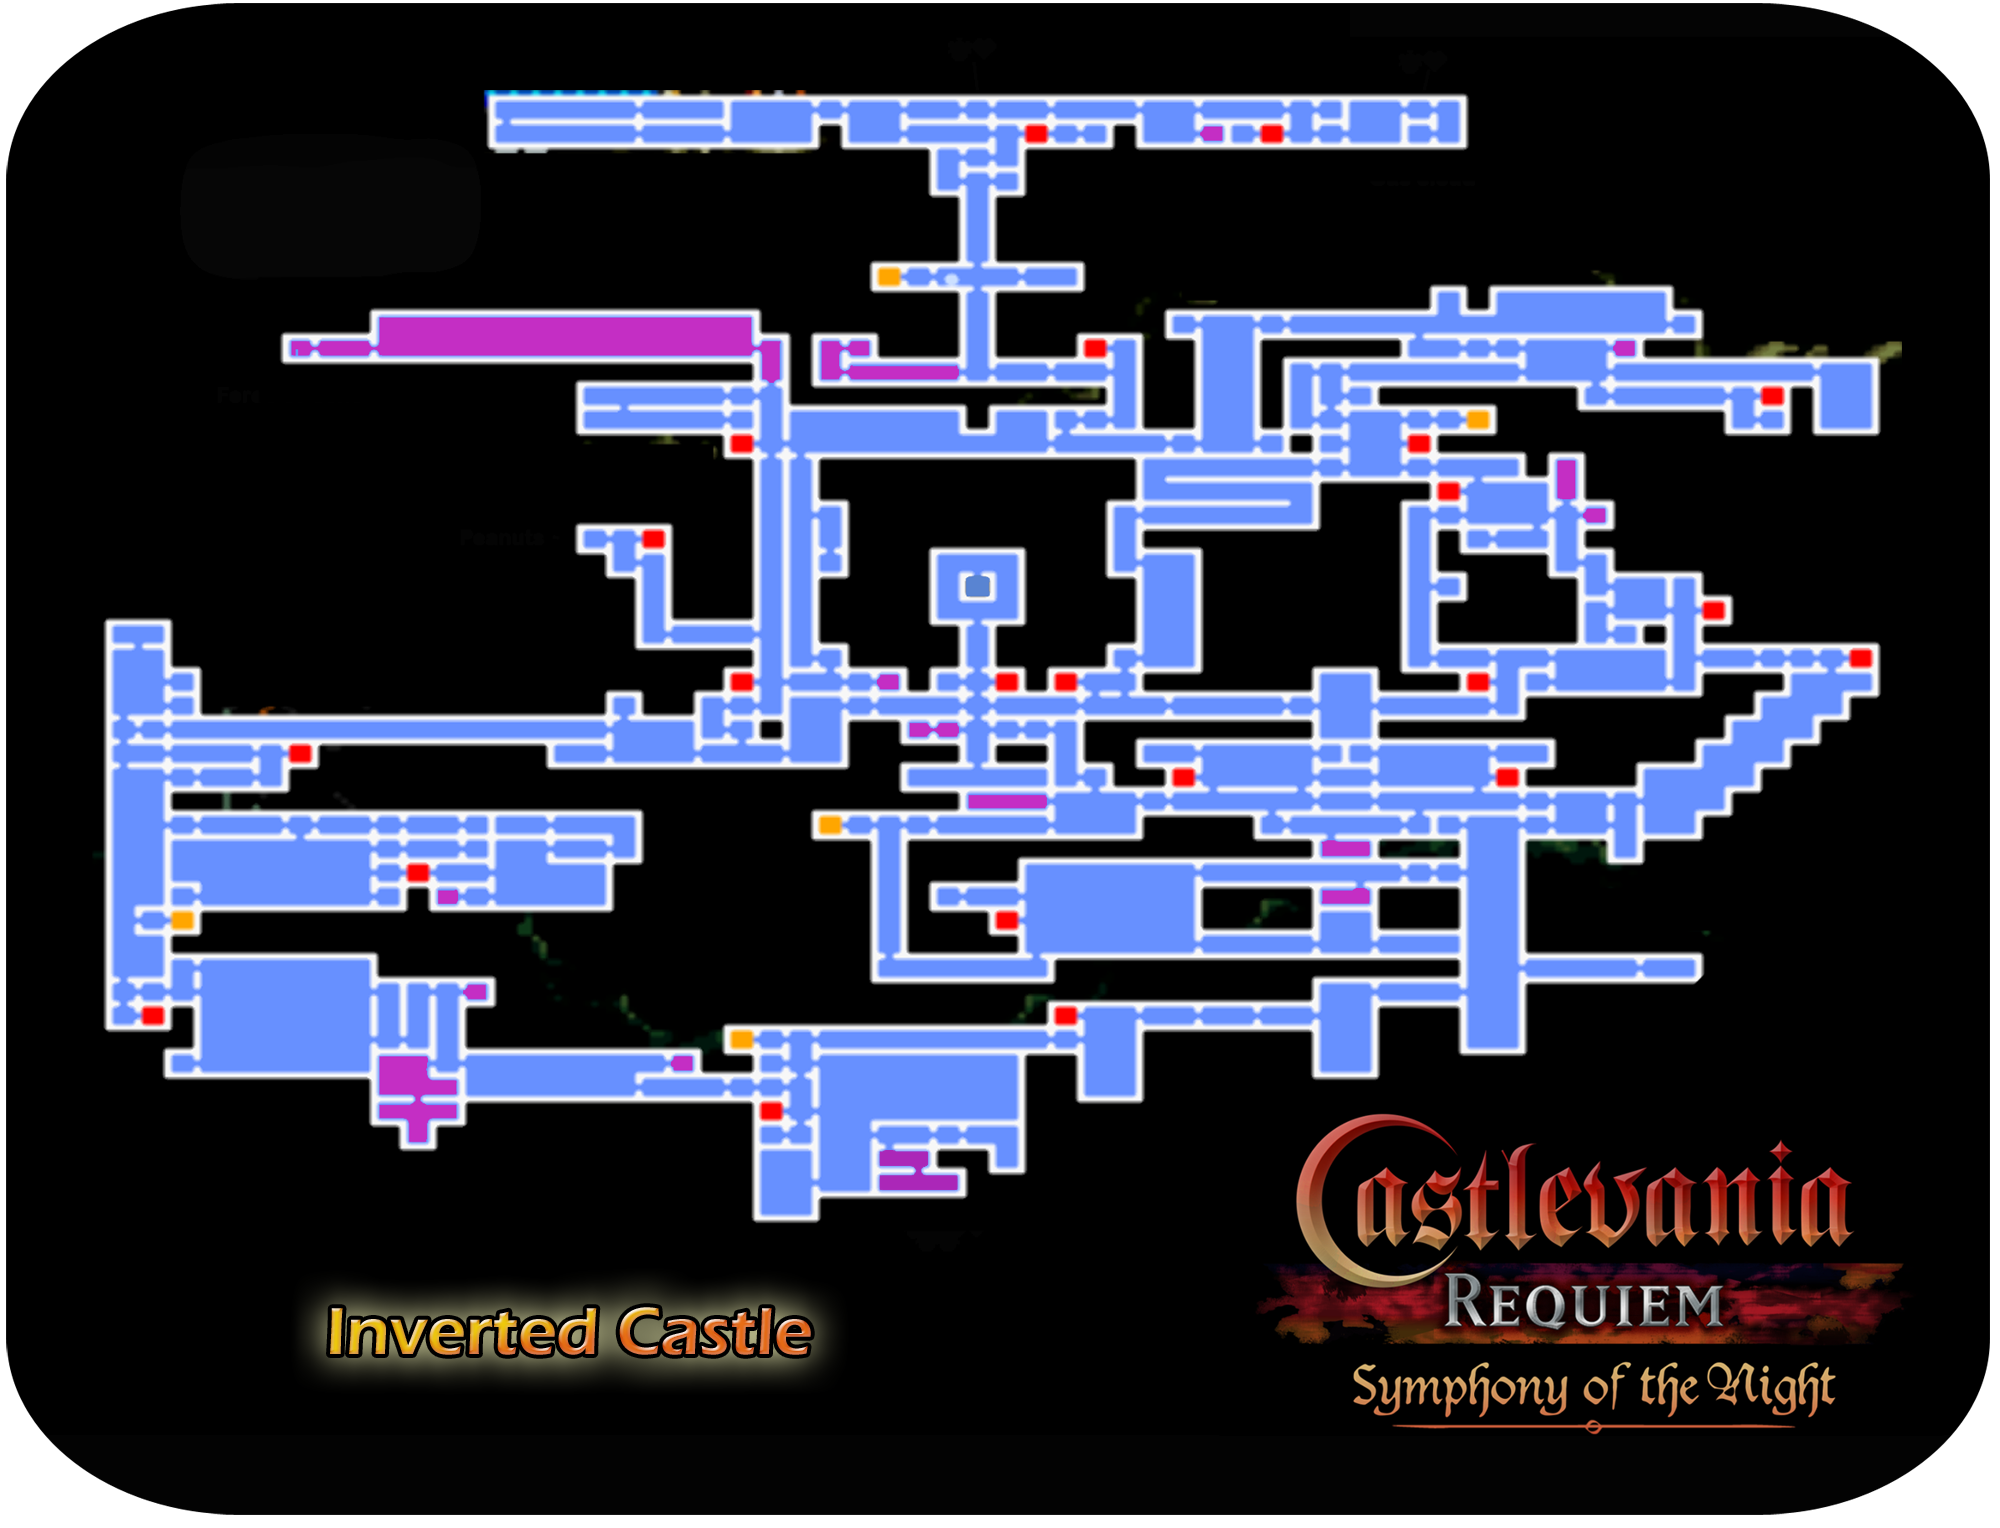 lippen-wagen-m-chtig-castlevania-symphony-of-the-night-gold-ring